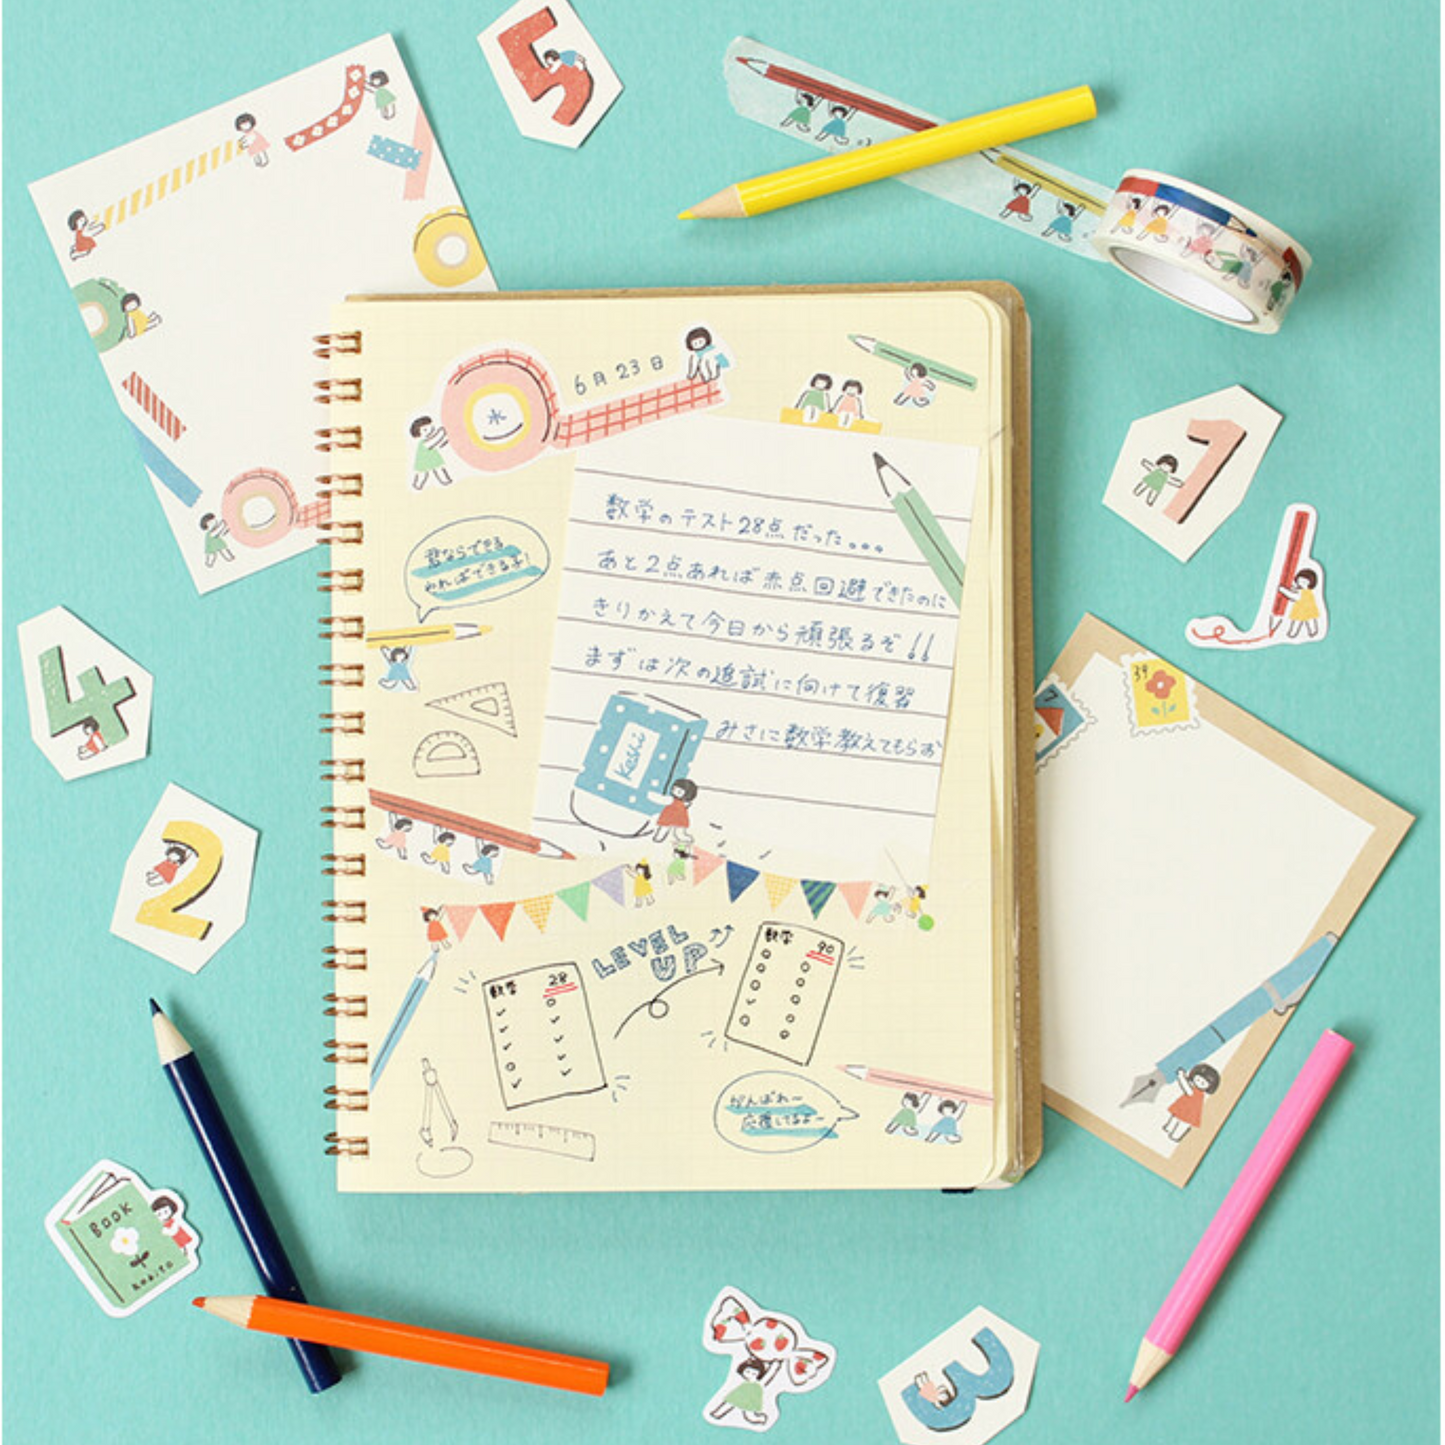 Little People Stationery Memo Pad